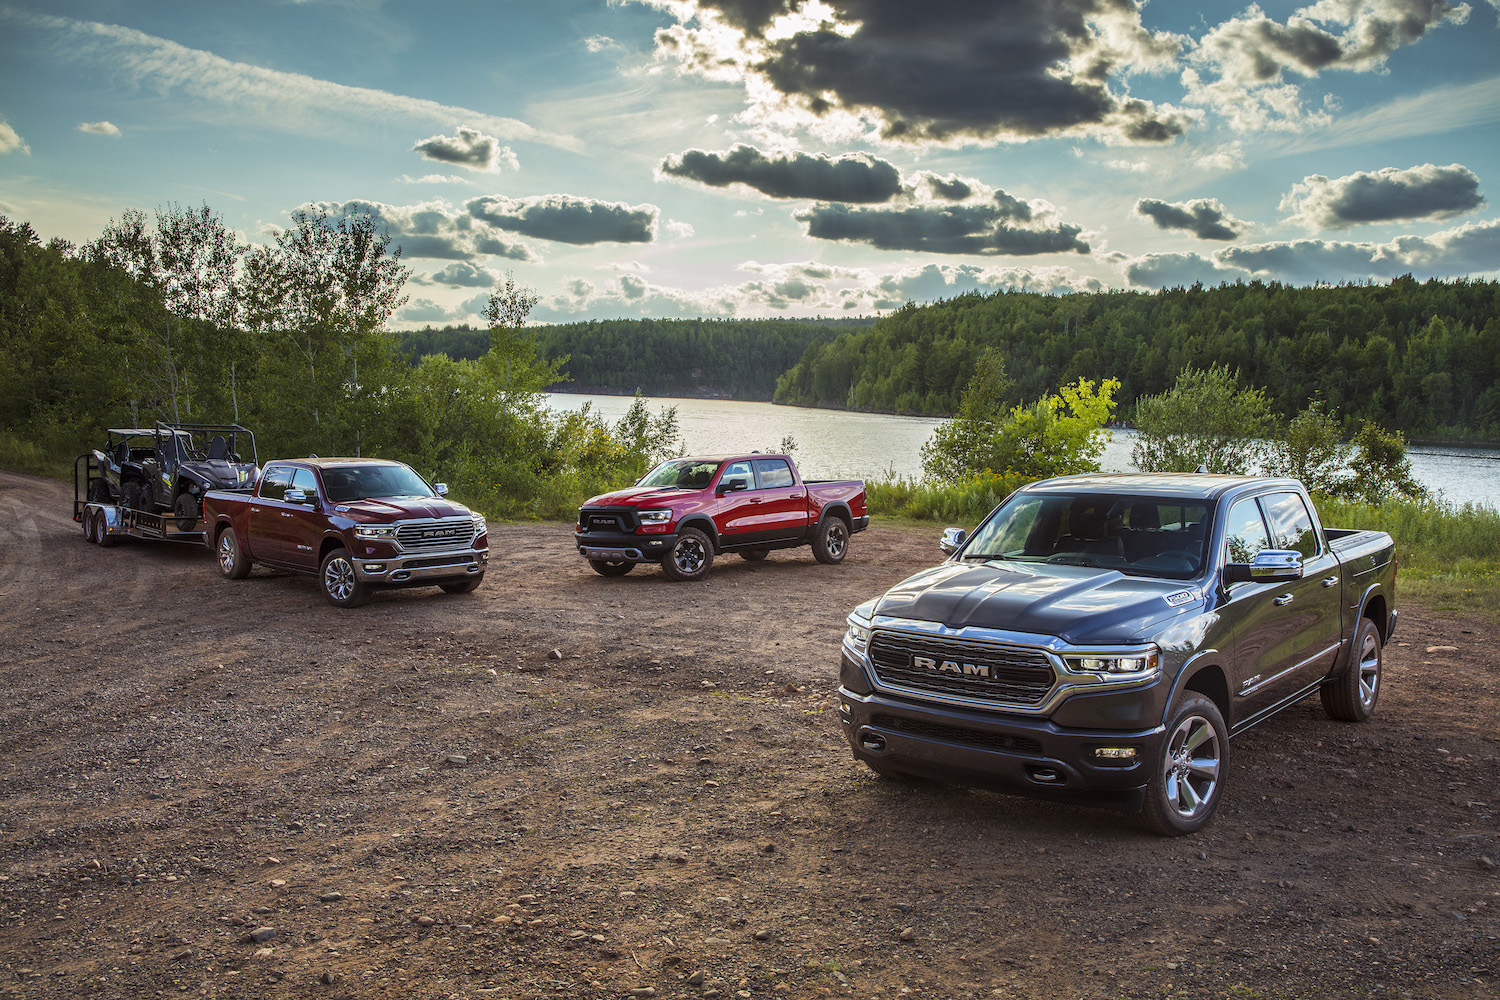 Three 2022 Ram 1500 pickup trucks parked on a dirt road in front of a farm.